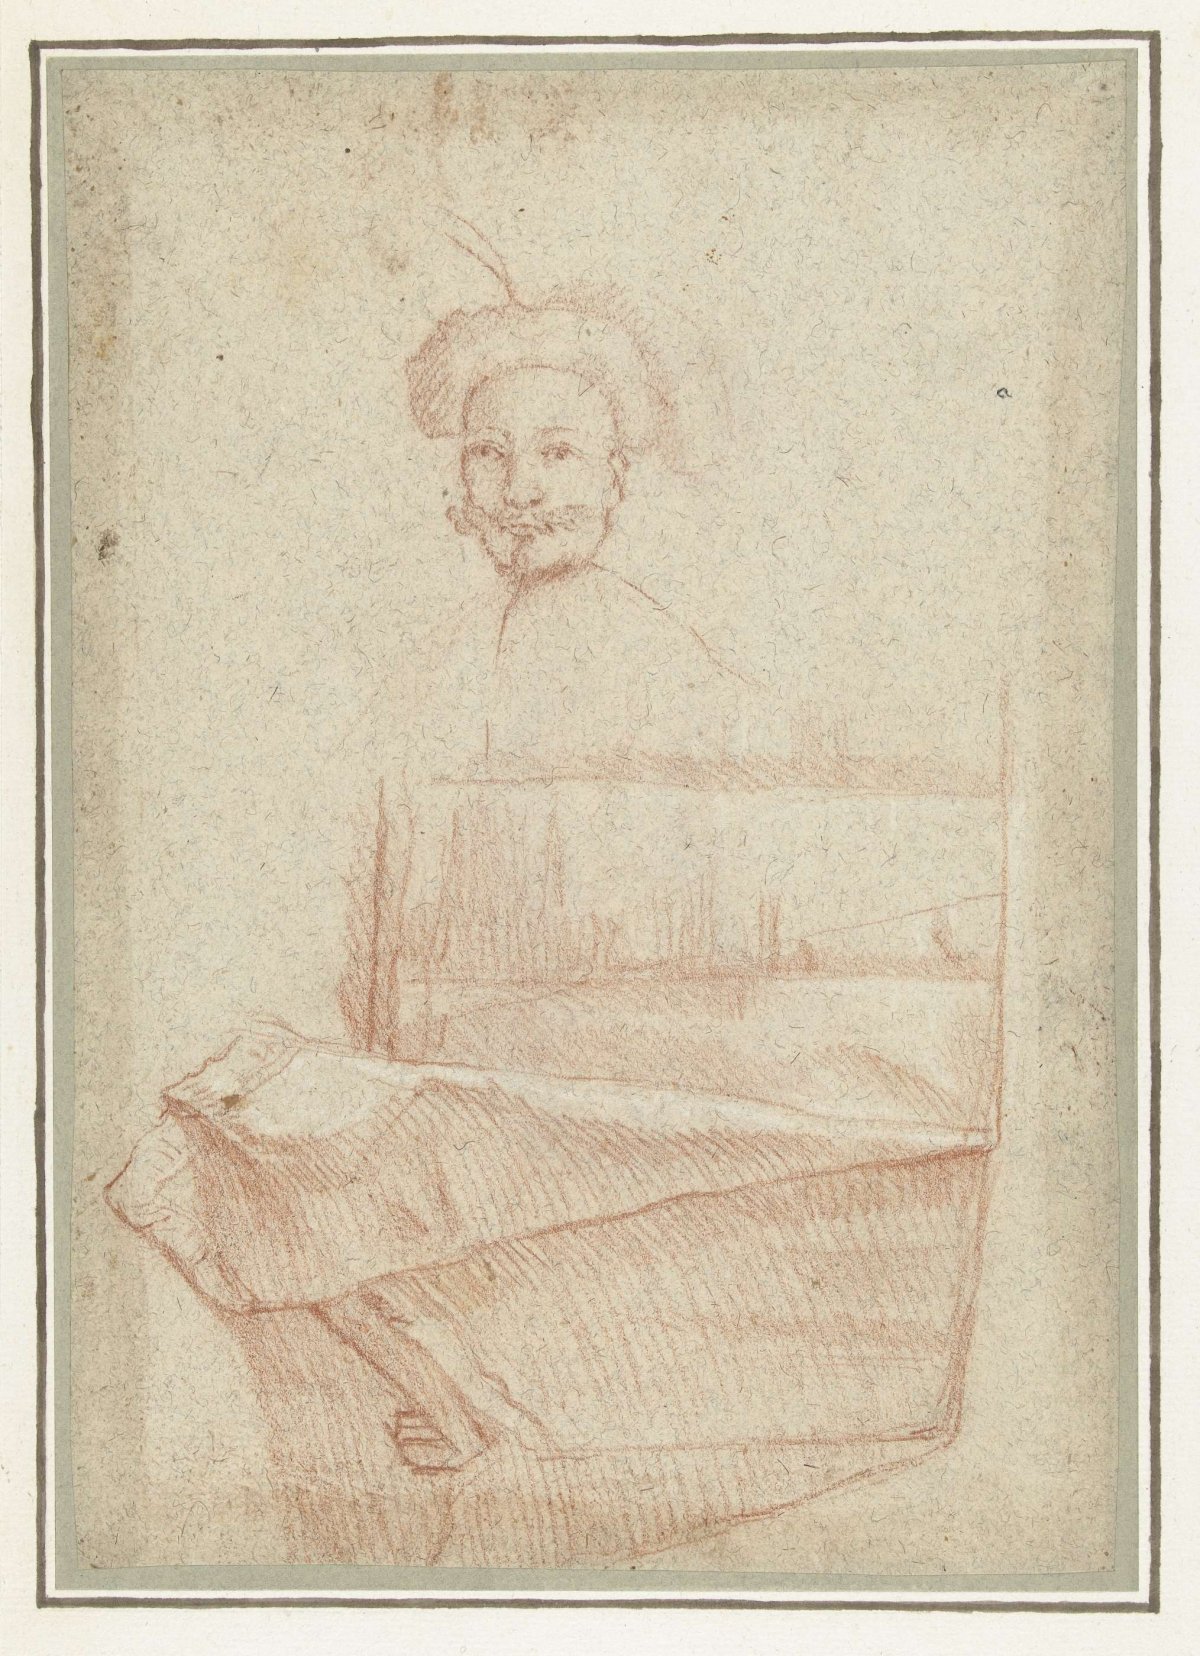 Studies of a man's head and a tablecloth, Domenichino, 1591 - 1641